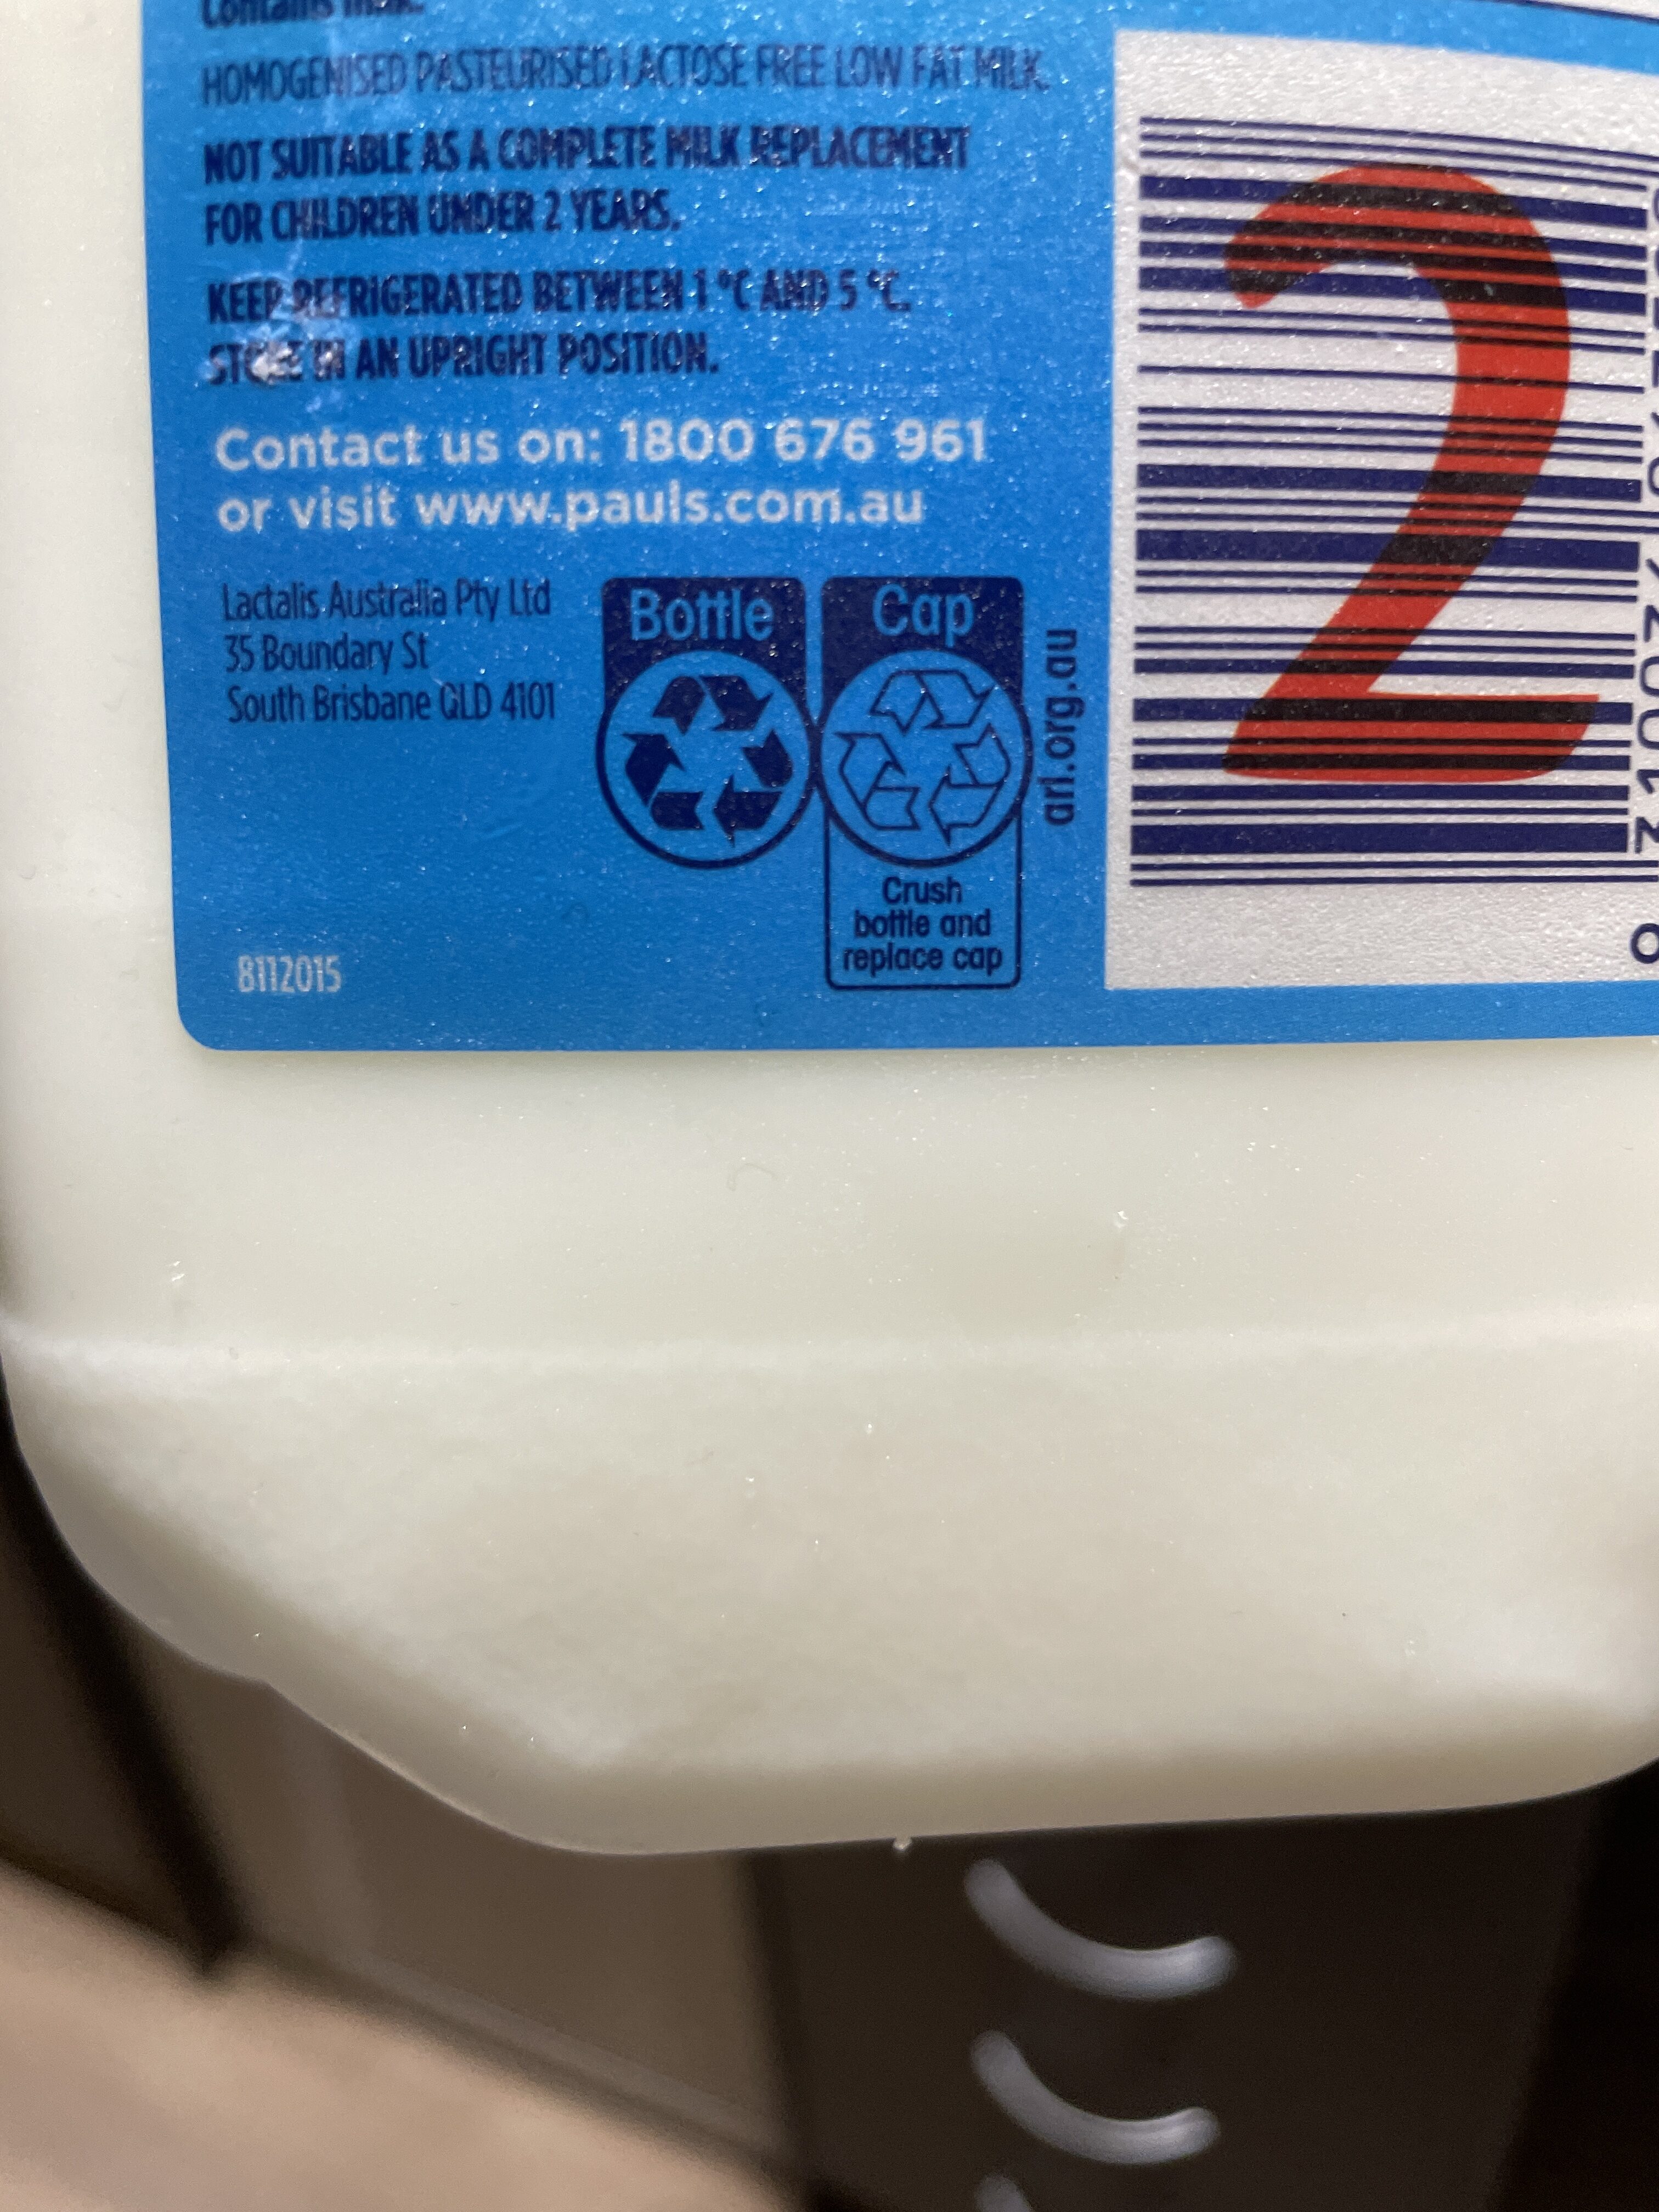 Paul’s zymil lactose free low fat milk - Recycling instructions and/or packaging information